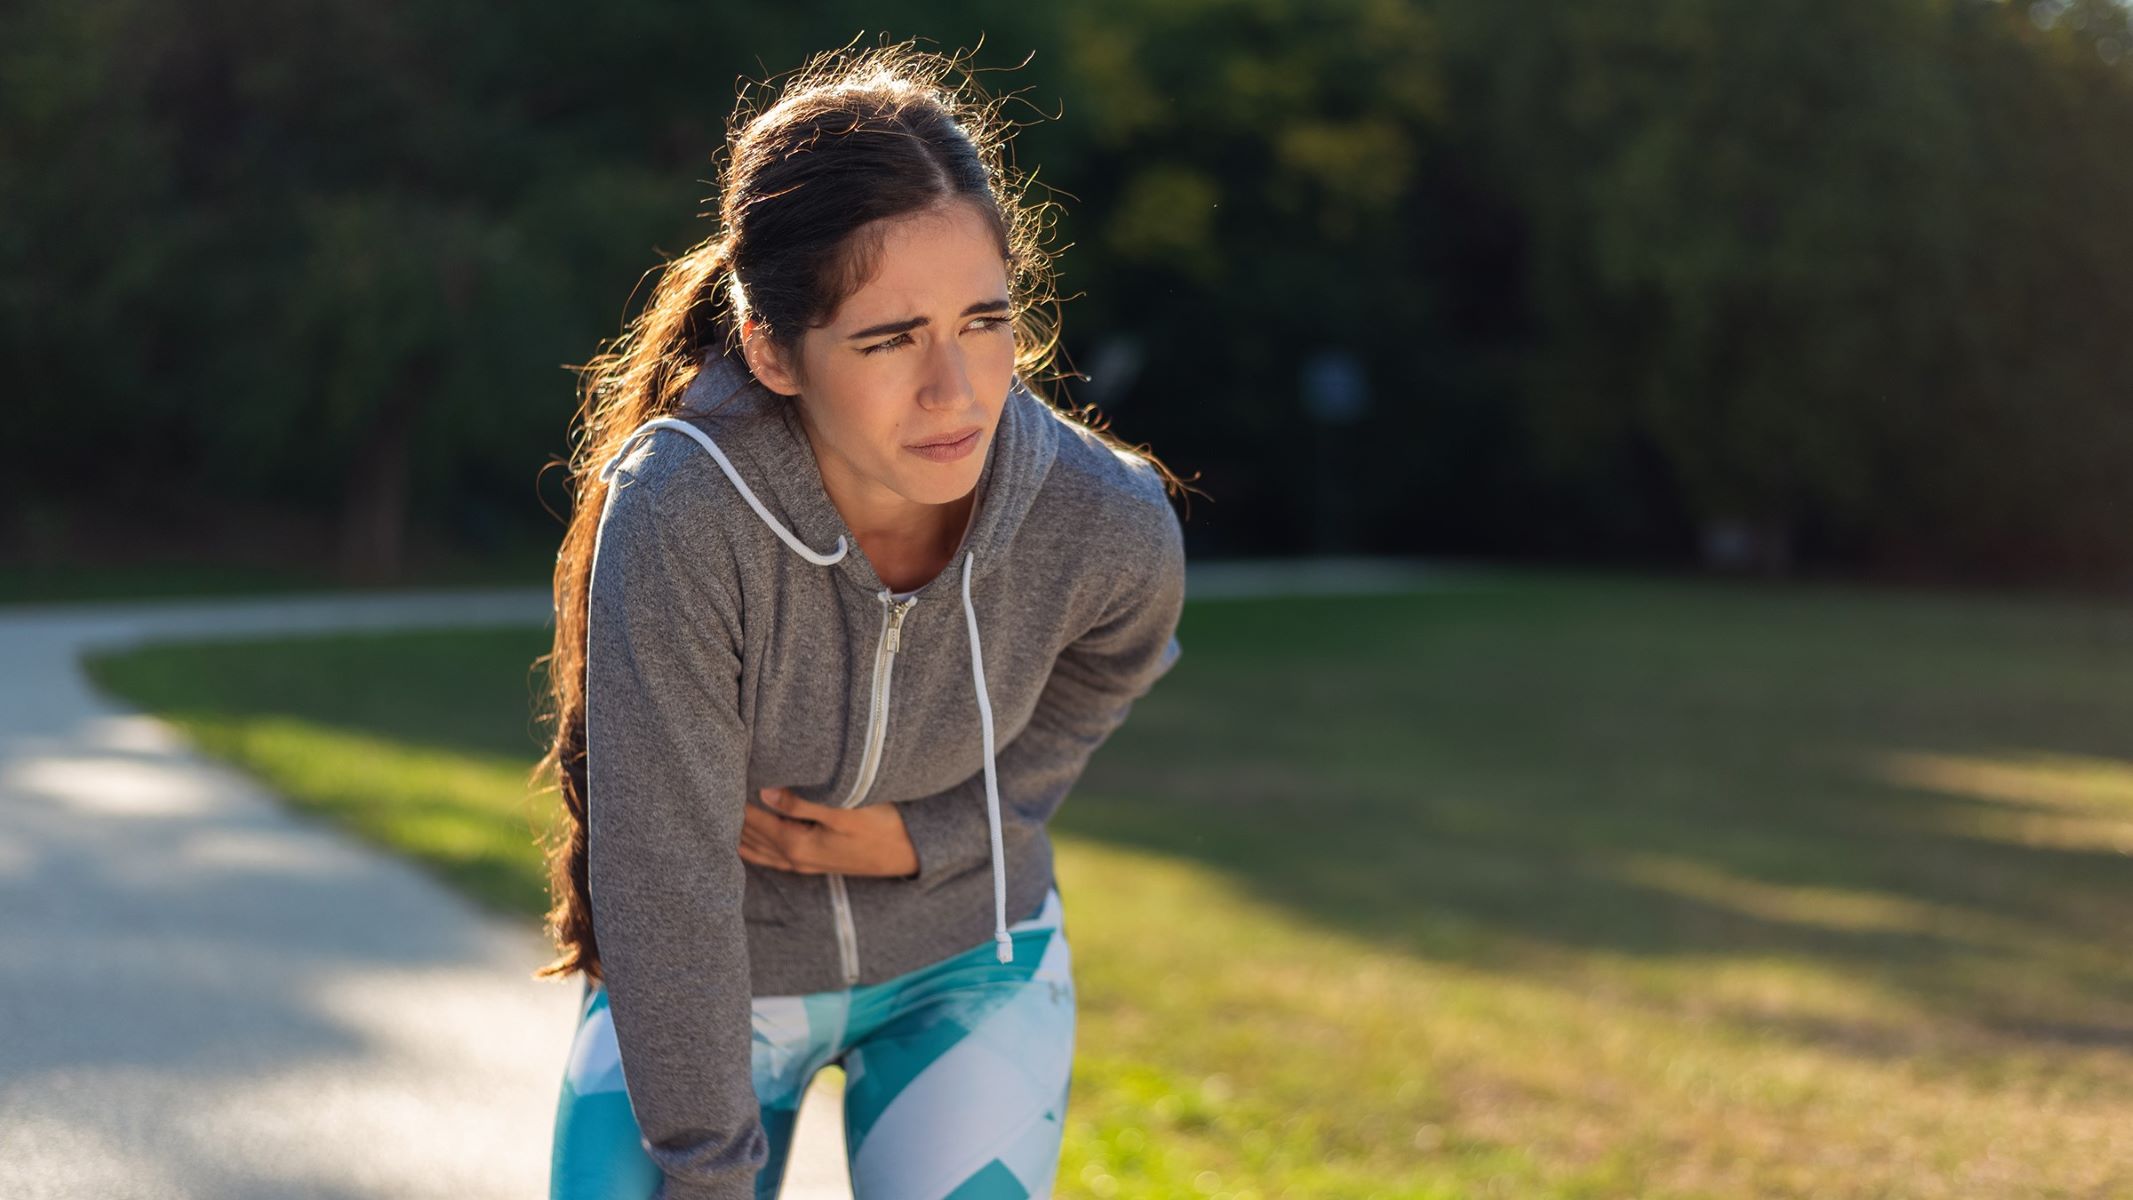 What Are Some Ways To Alleviate Stomach Pain While Running?